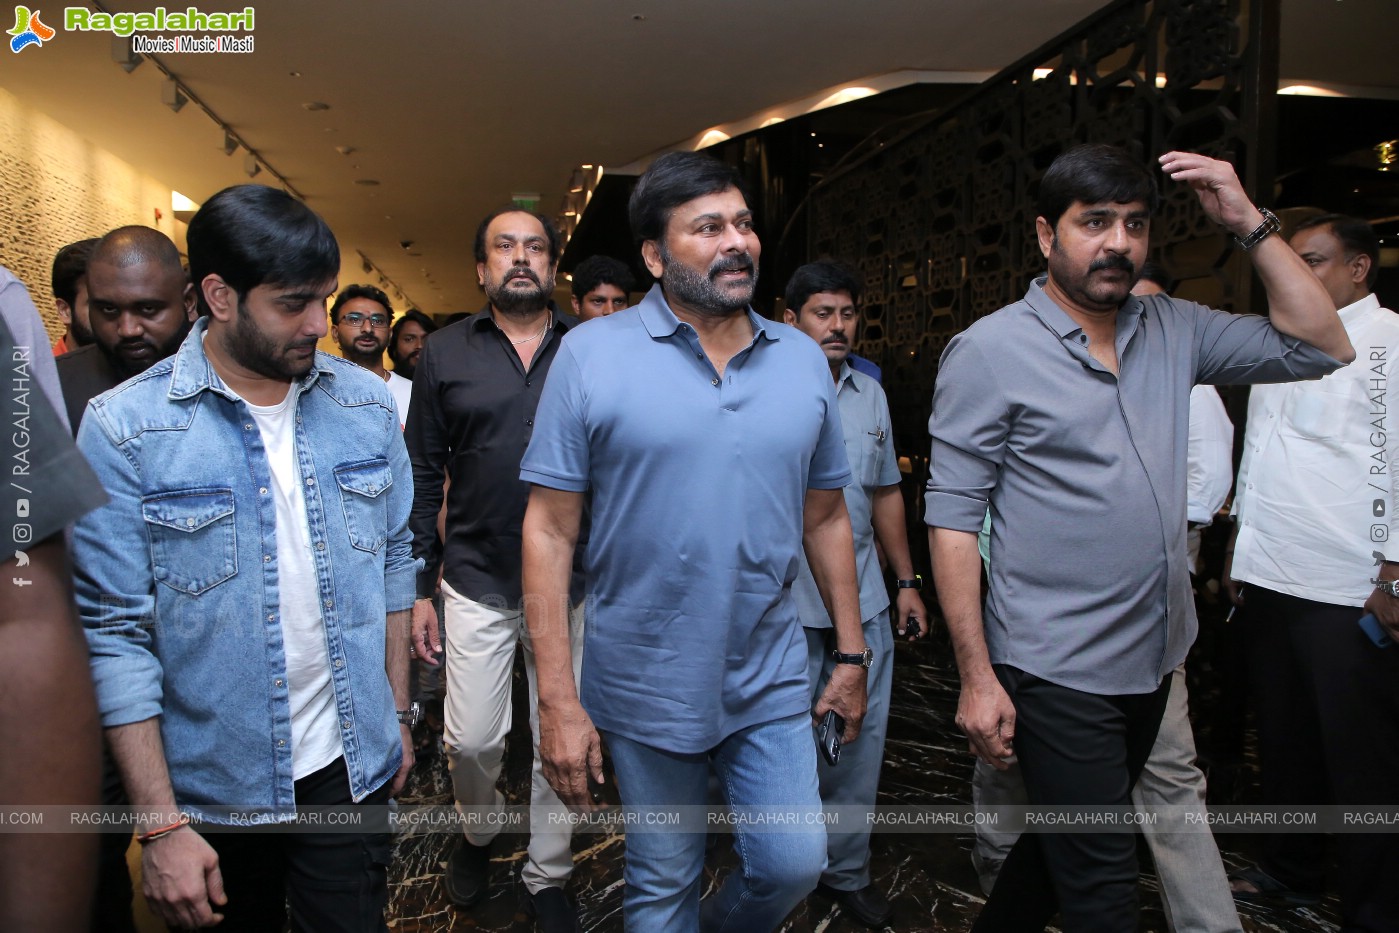 Celebrity Cricket Carnival Jersey & Trophy Launch by Chiranjeevi